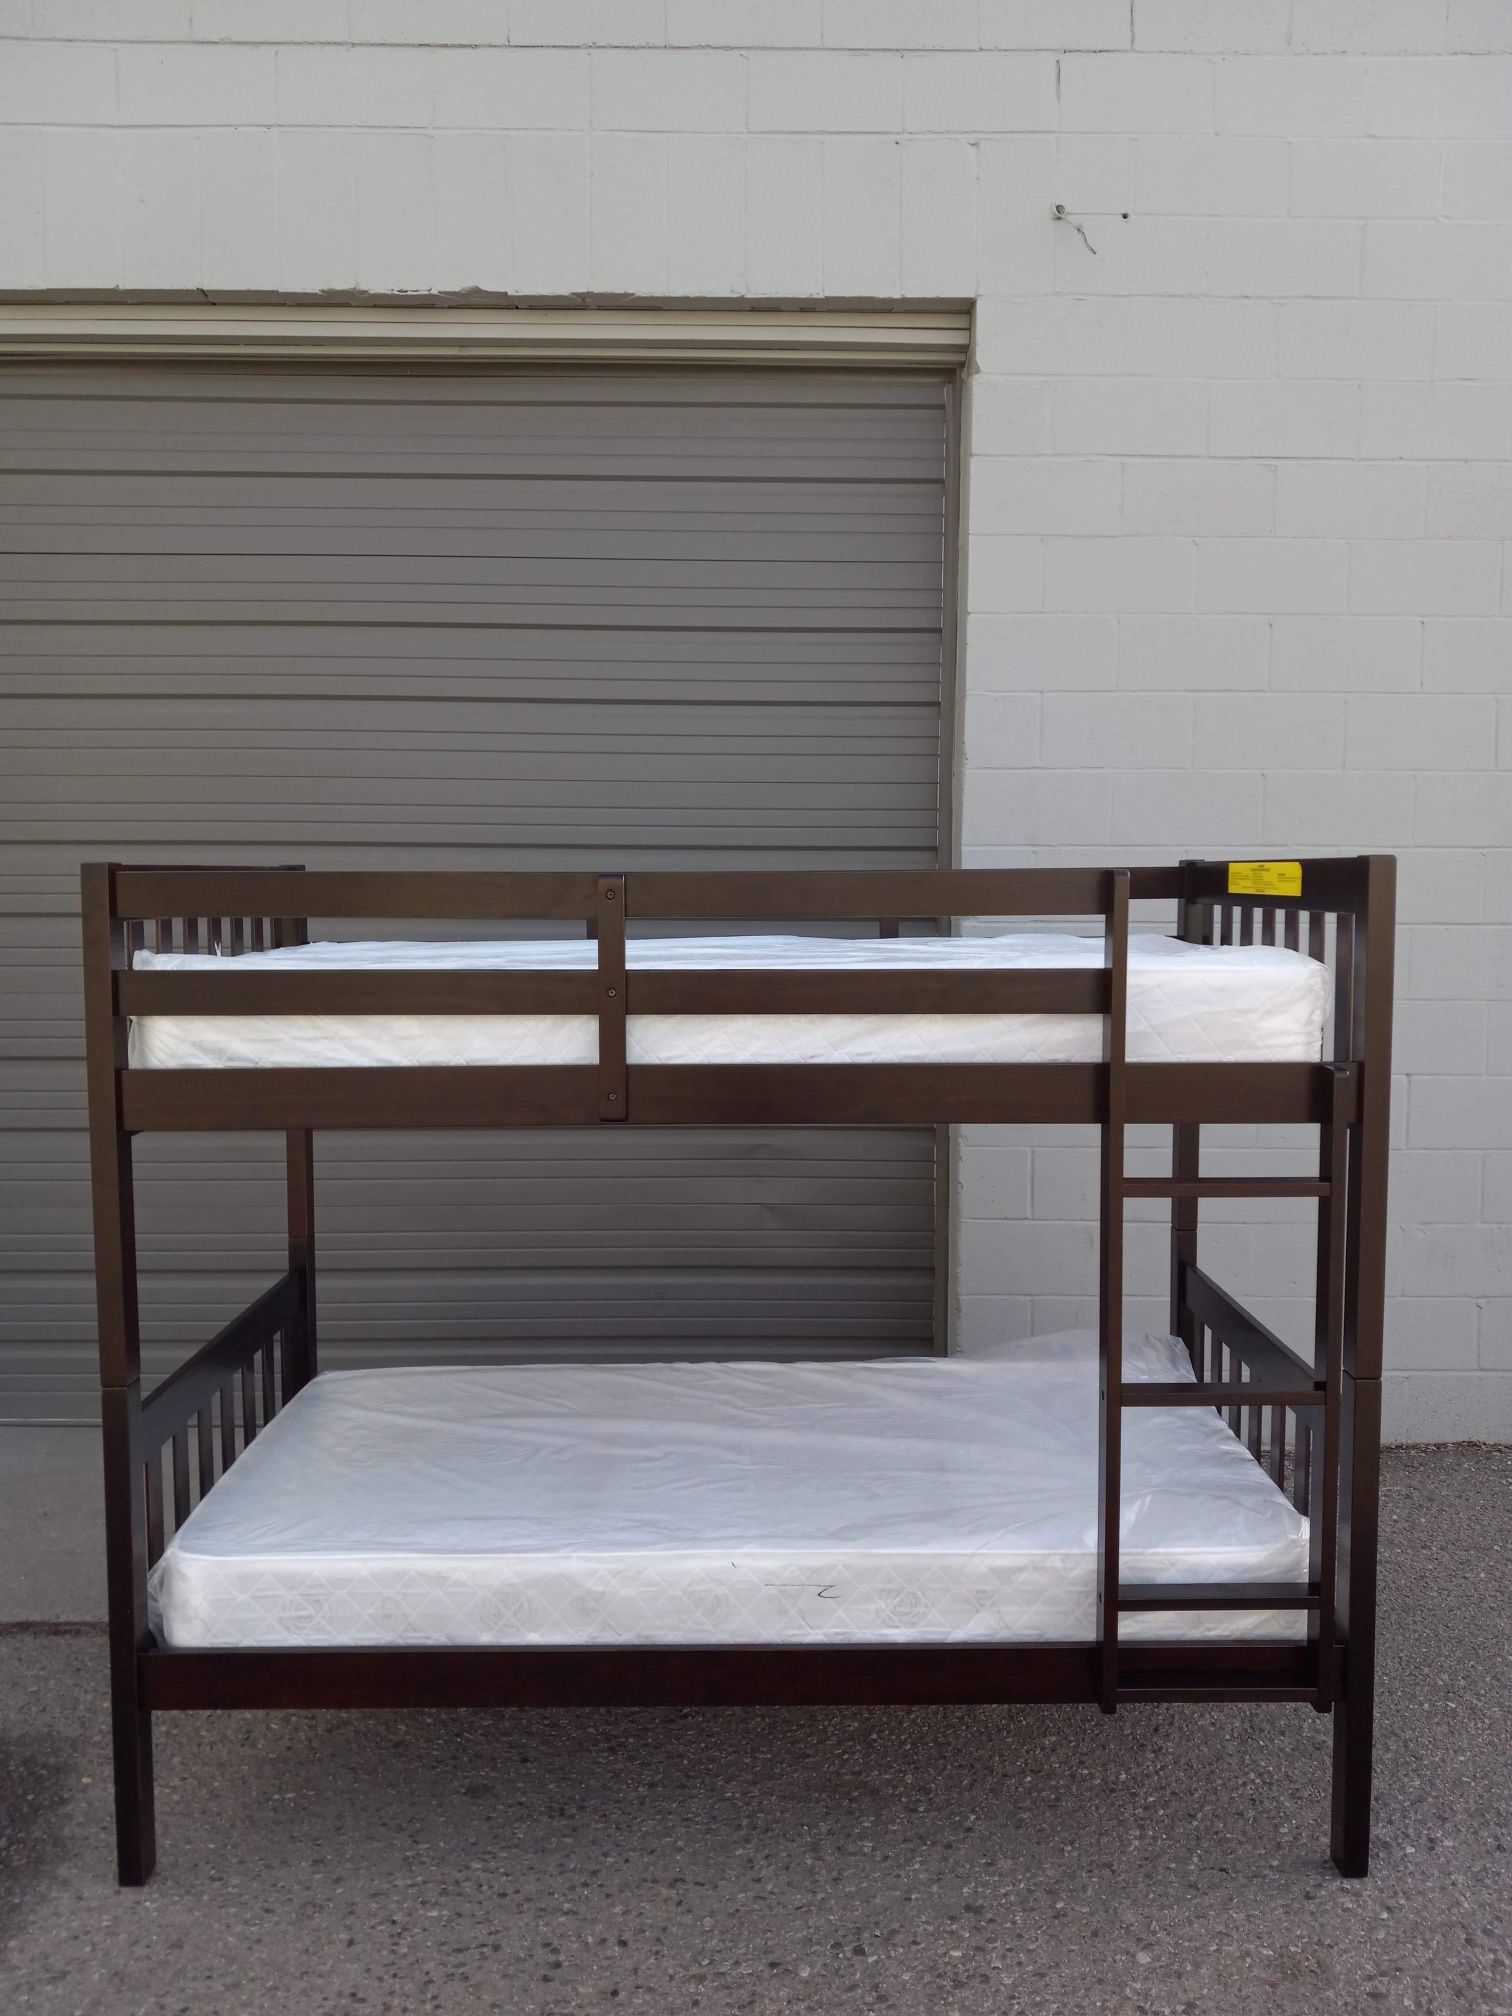 New Cherrywood Bunkbed Includes 2 New Mattresses